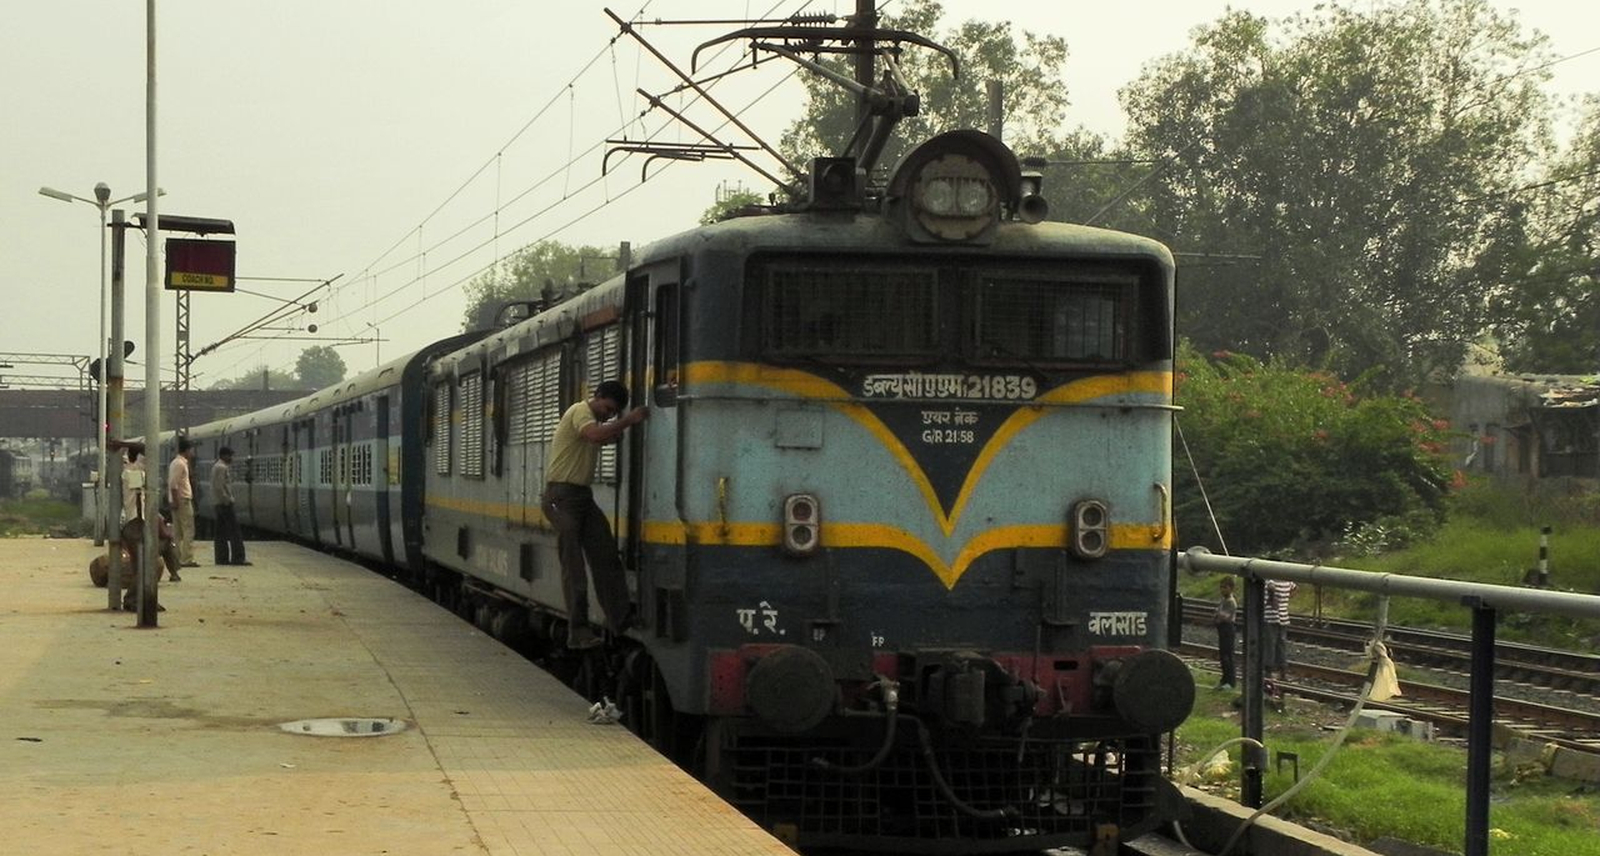 No. 21839 in July 2011 in Ahmadabad on the Gujarat Express